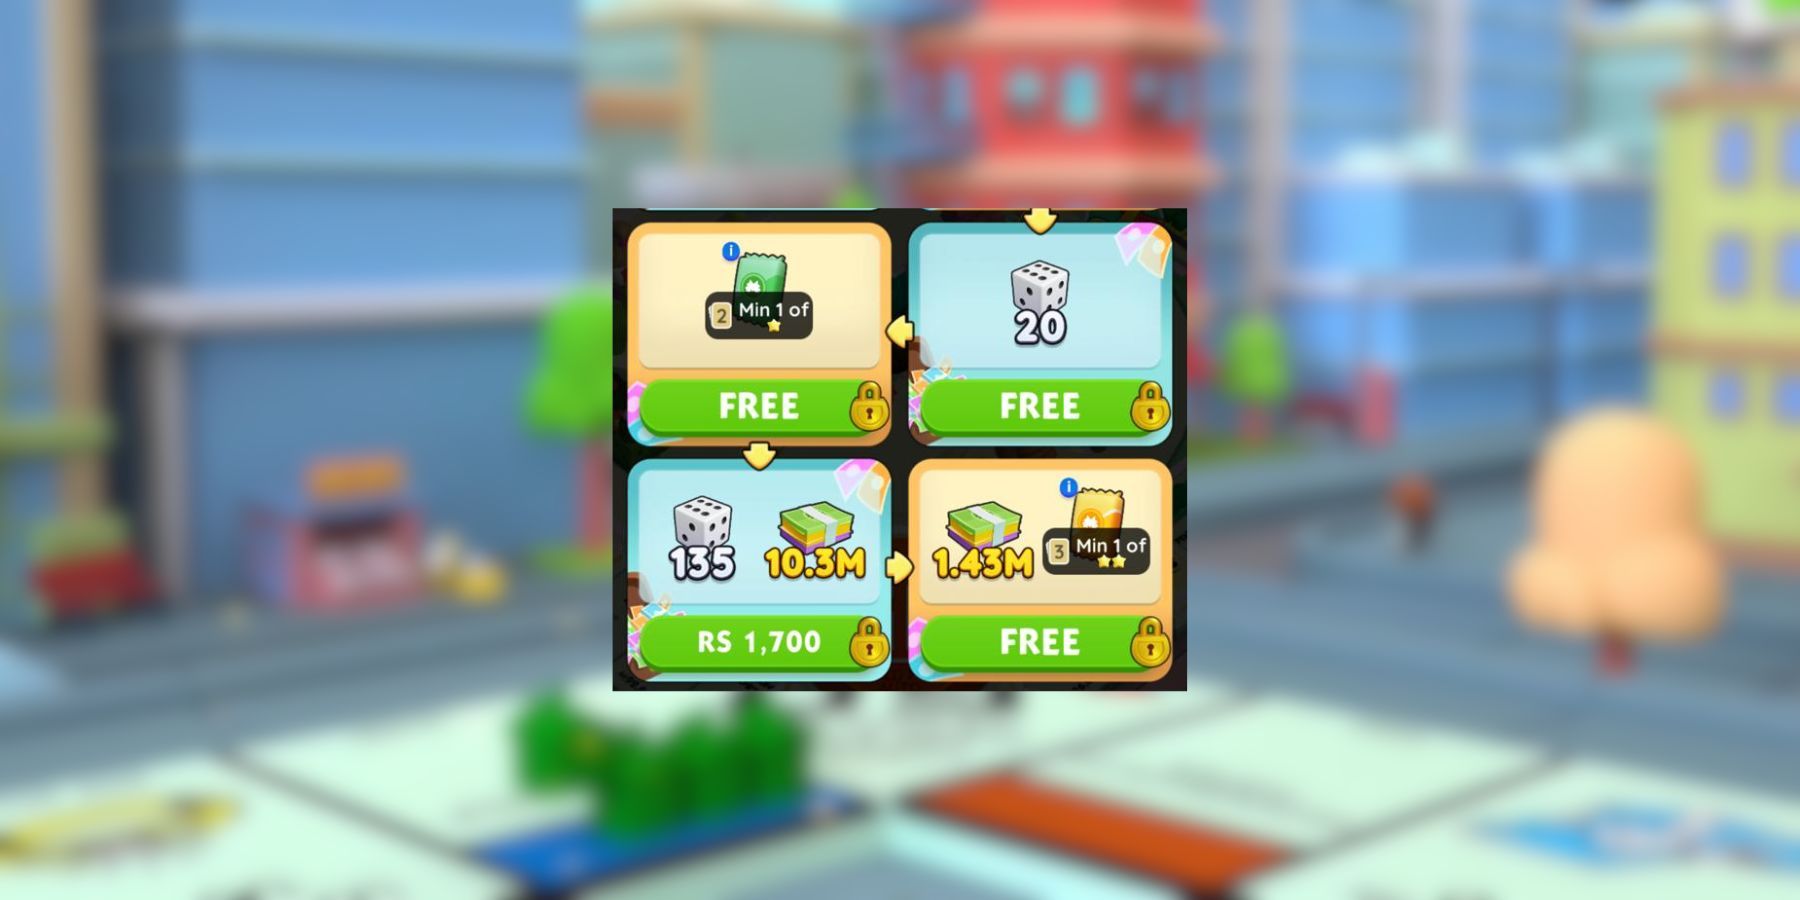 free gifts in the shop monopoly go